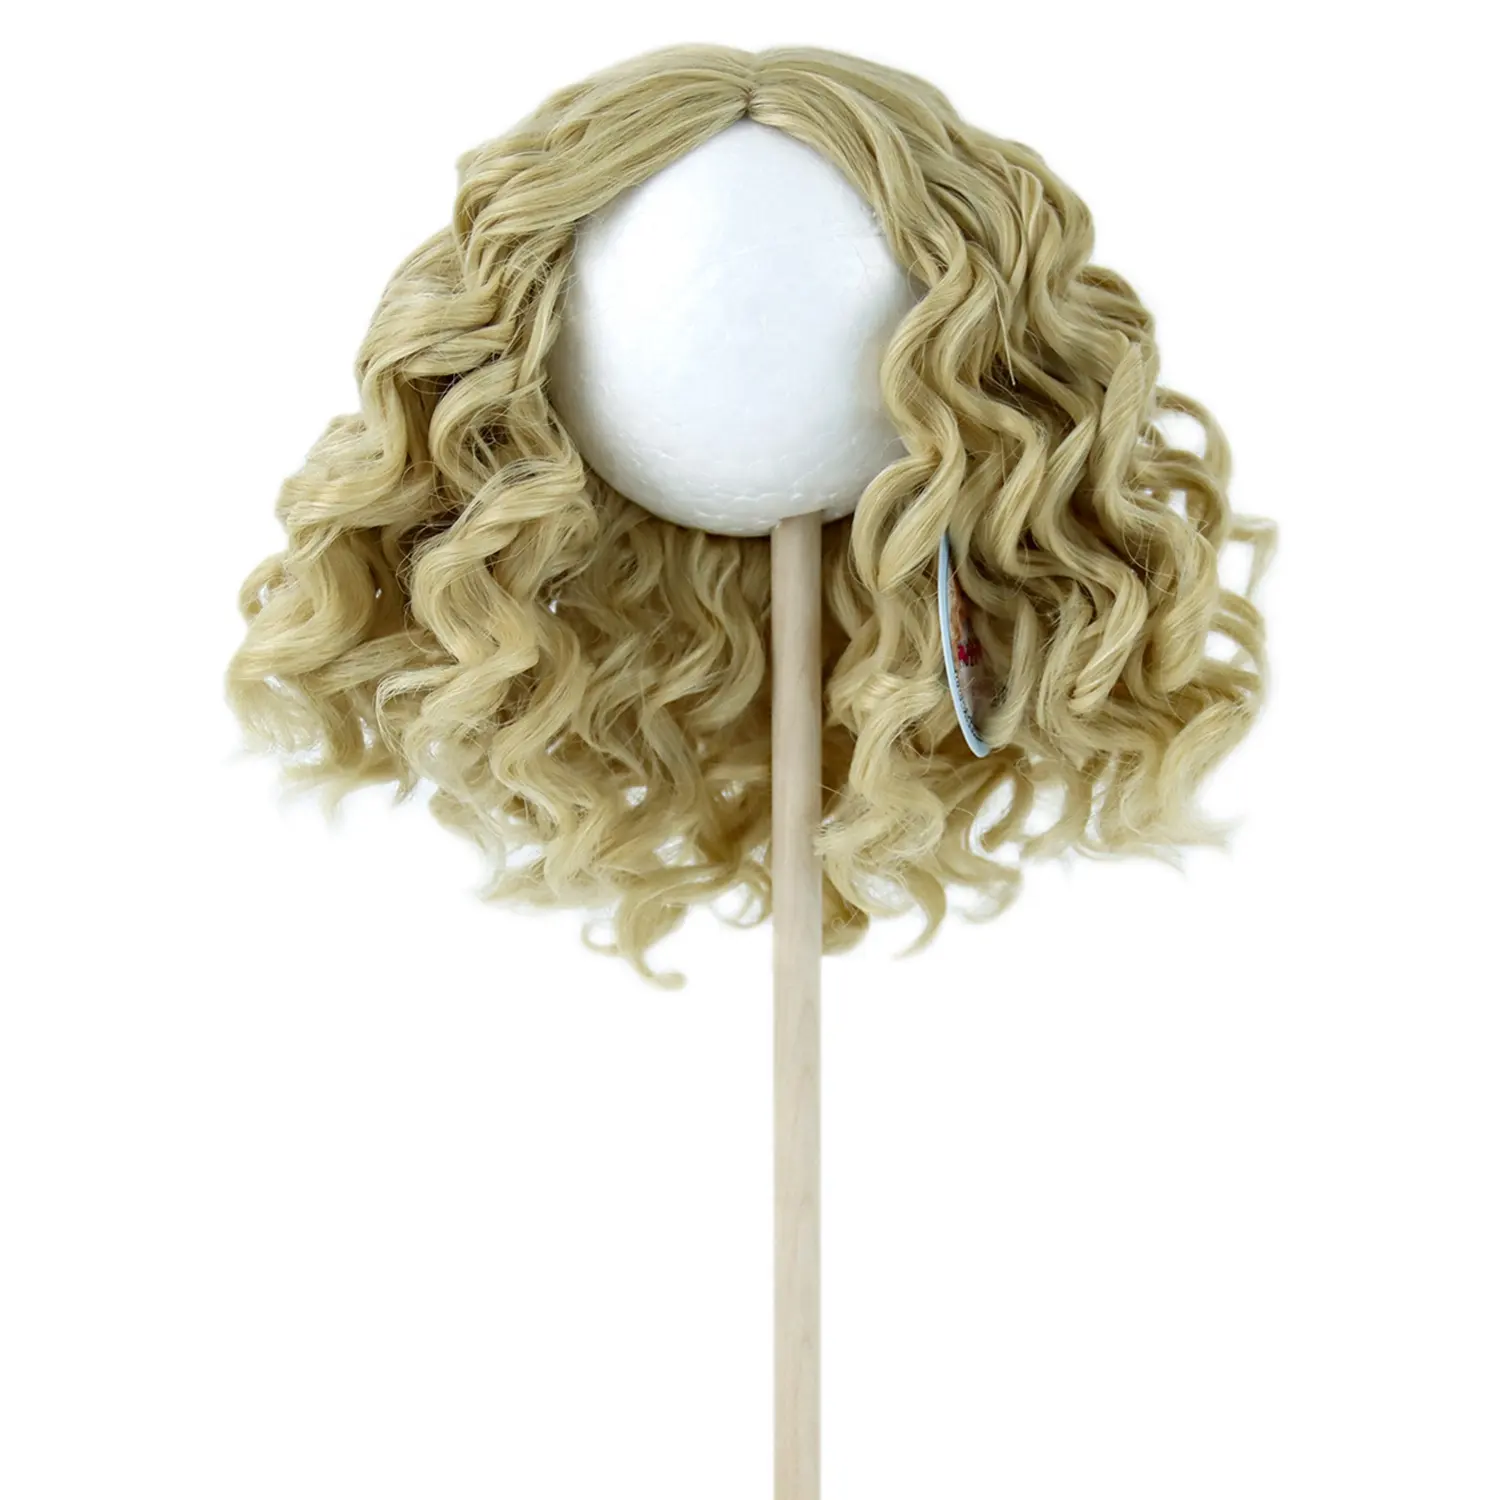 Synthetic doll wig Afro curly wigs water wavy light brown doll hair fit for 26cm head 45cm 18 inch american doll